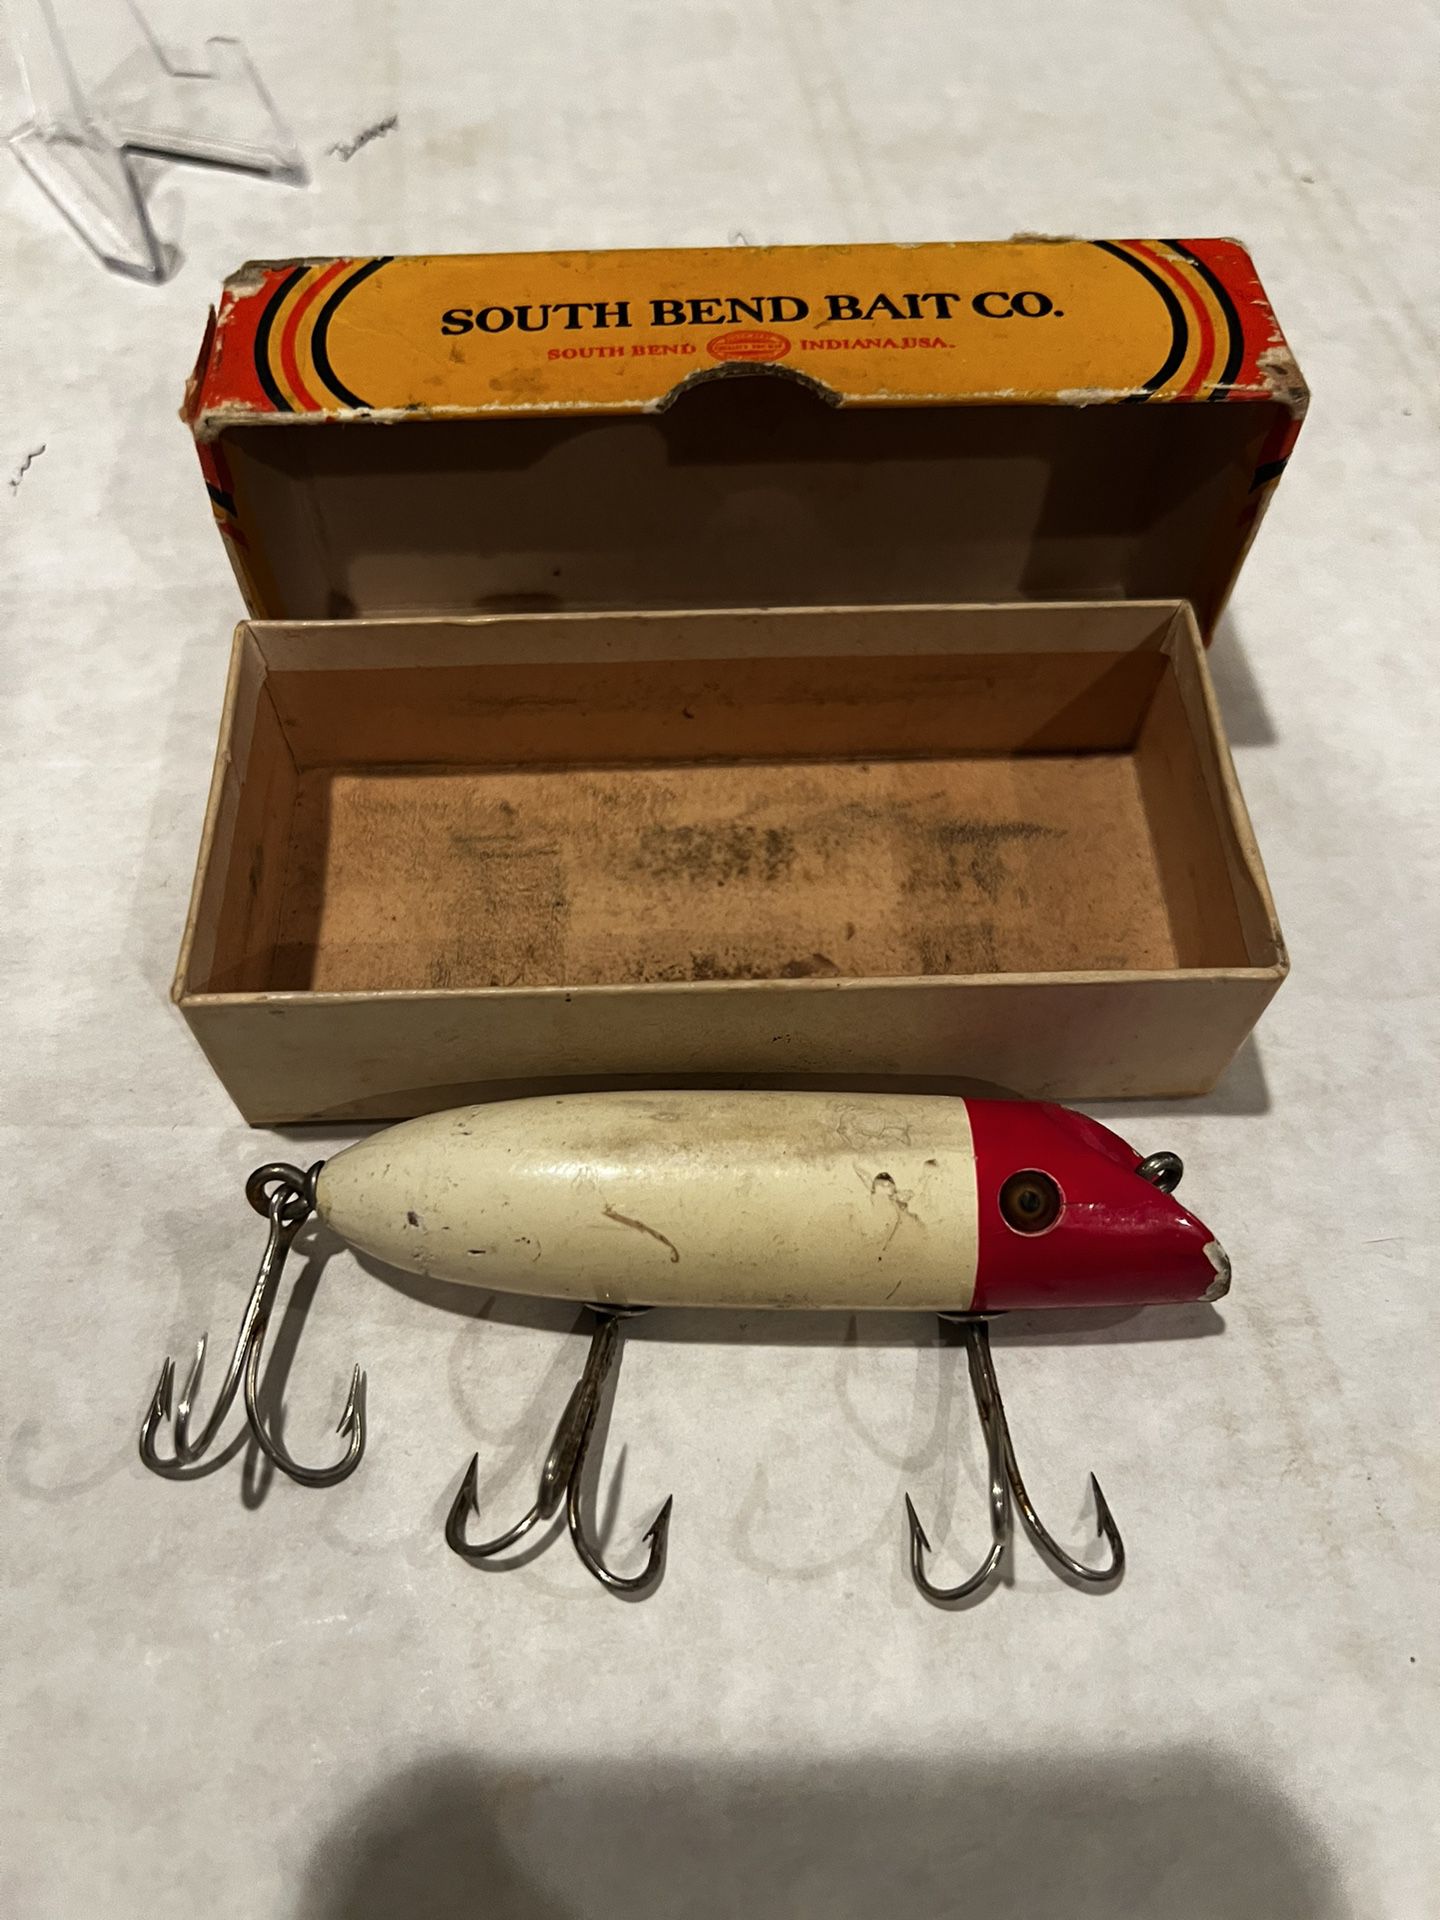 VINTAGE South Bend Bass-Oreno #973 Lure for Sale in Dauberville